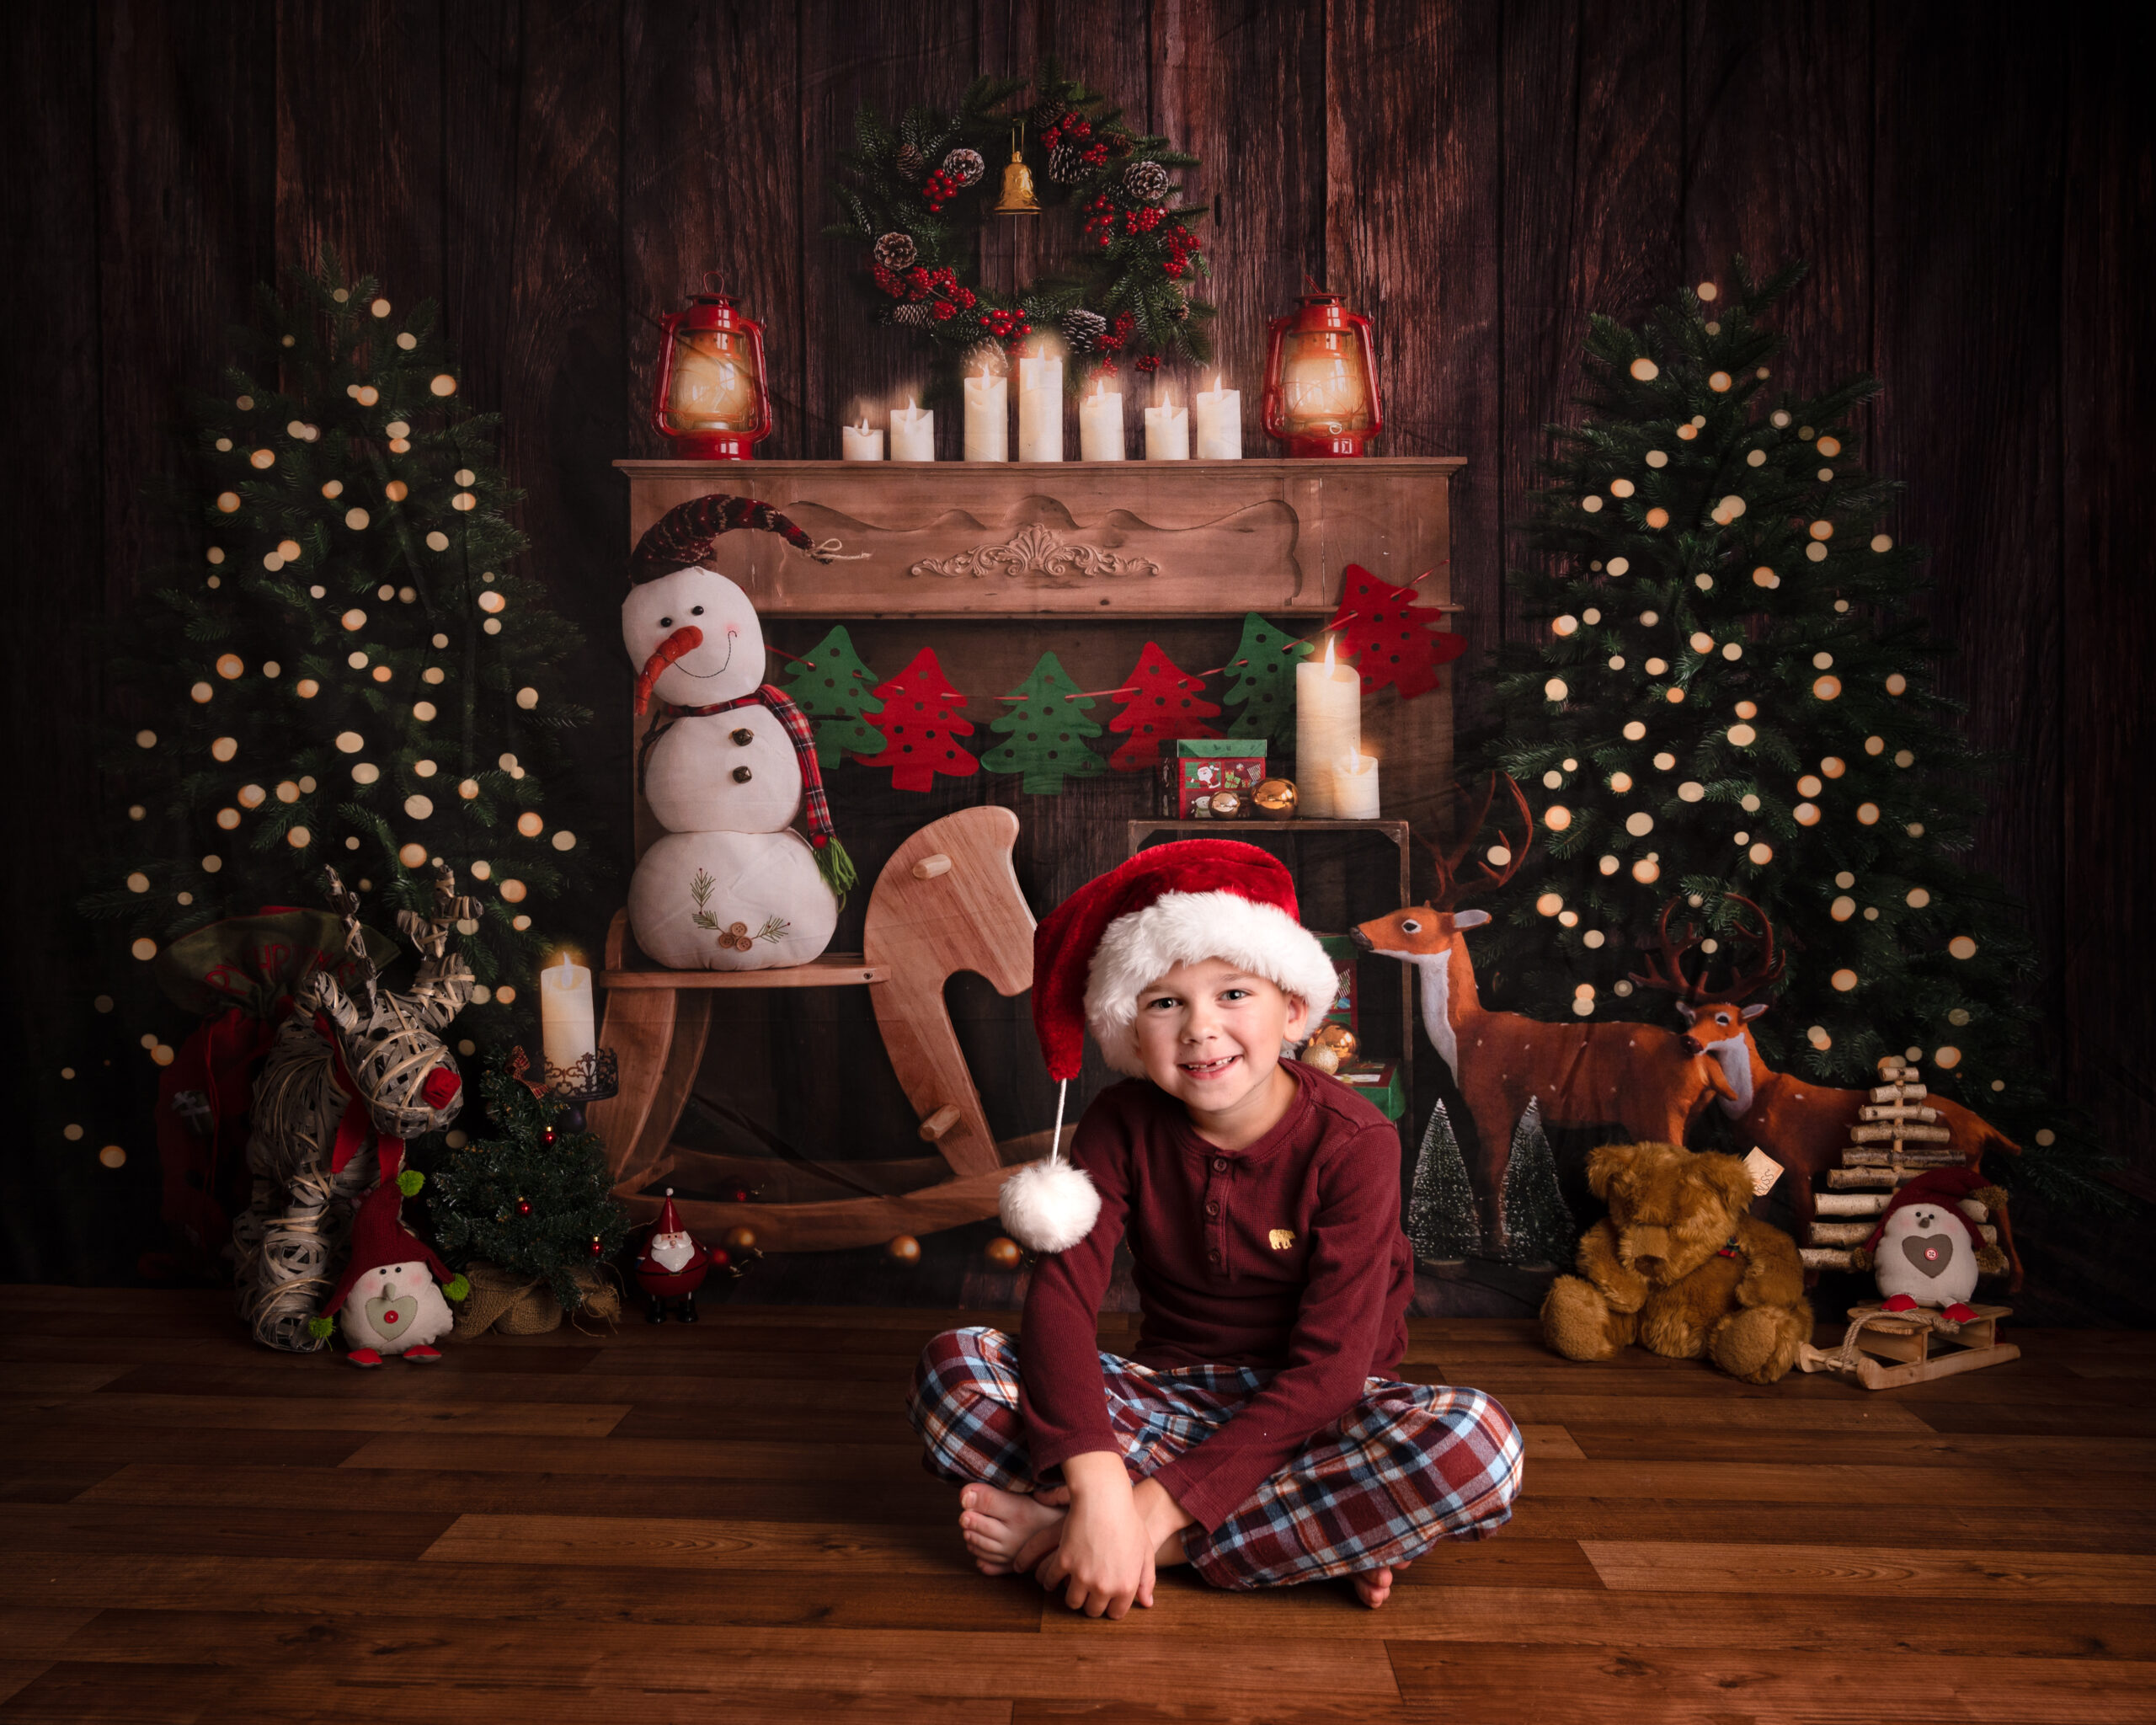 Christmas Mini Sessions are here!